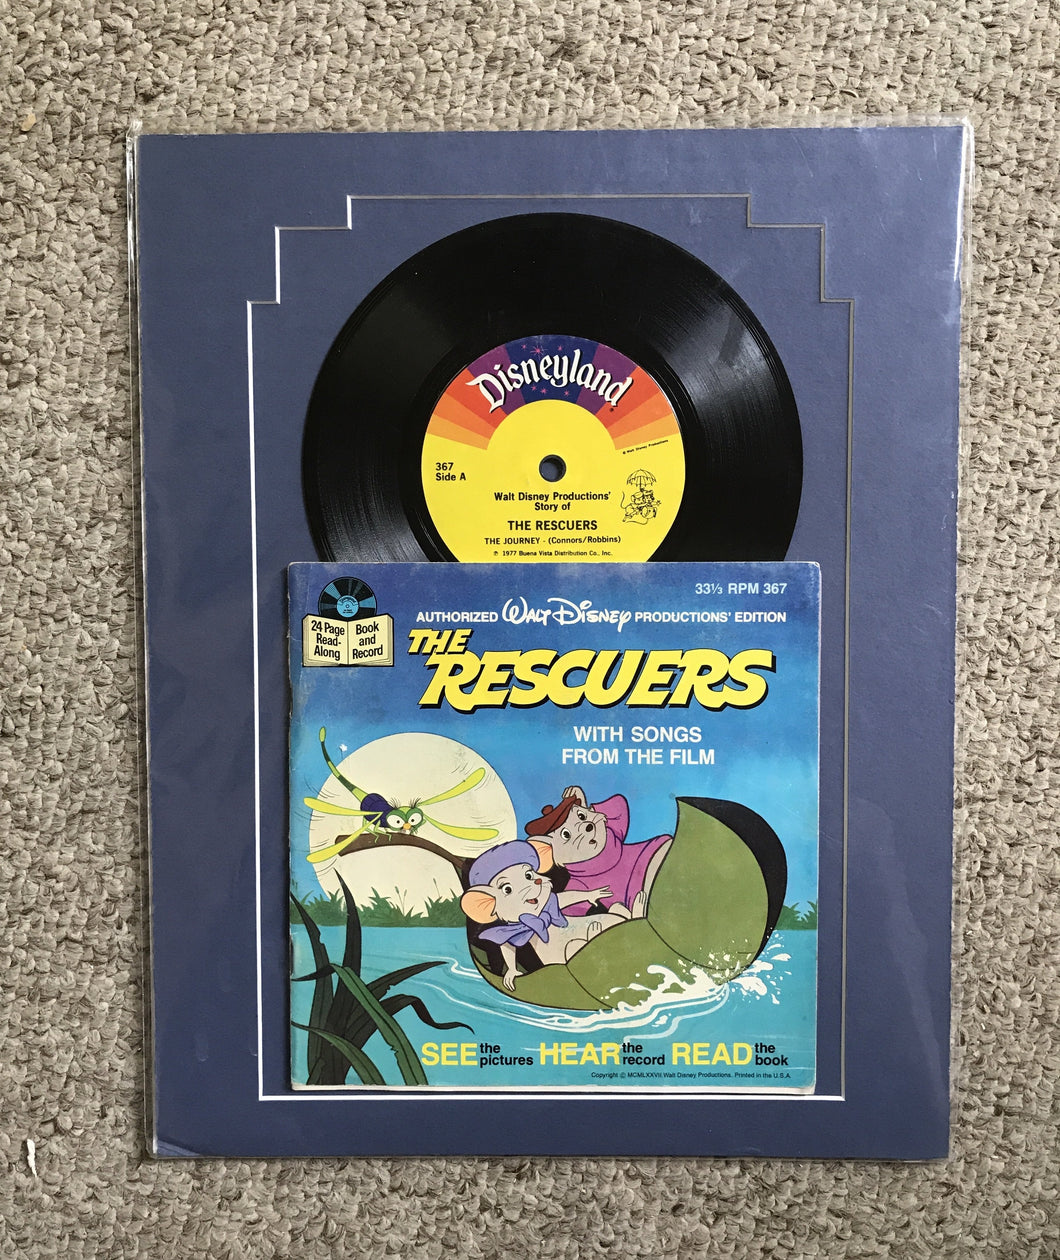 The Rescuers book and record from 70’s